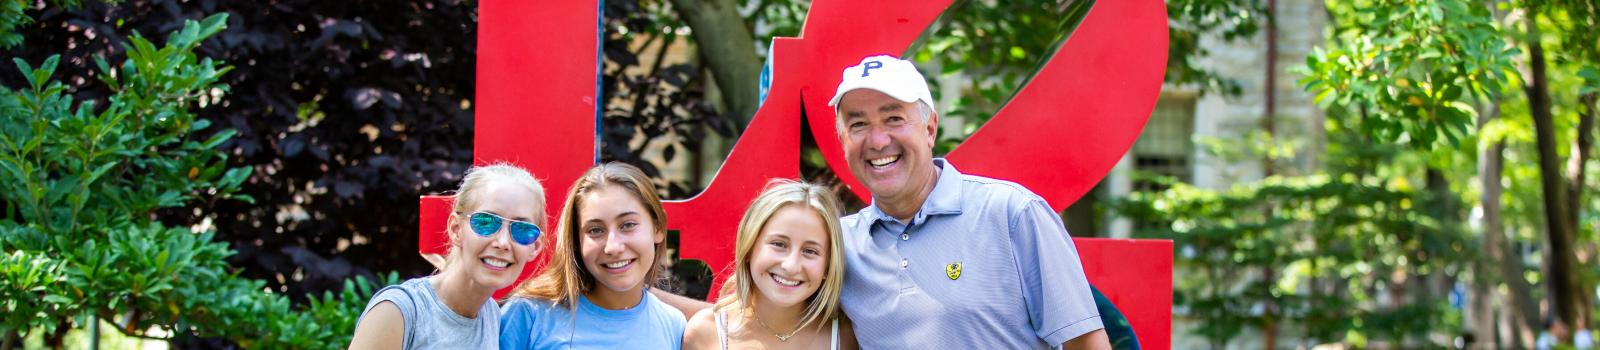 A family of four is posing in front of the LOVE sculpture at the University of Pennsylvania. They’re all smiling, with the parents on the ends and two young women in the middle.